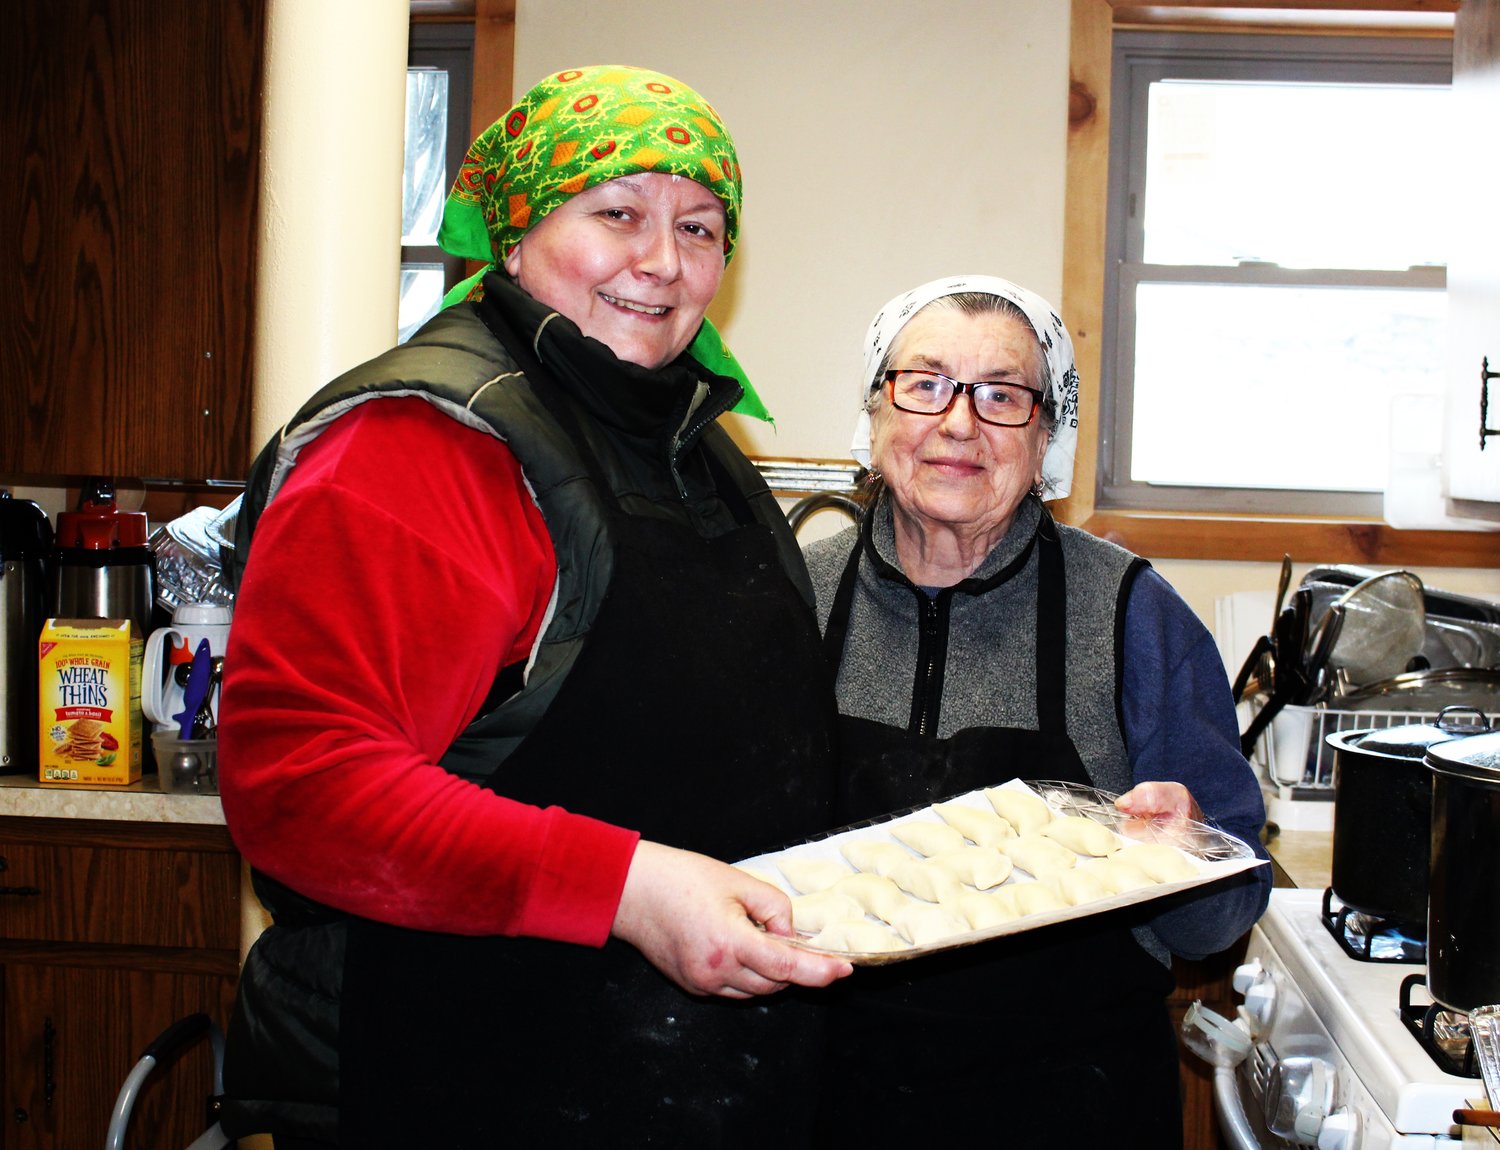 Maria Nakonczna and Irena Kostiuk prepare to plunge the delicacies into salted boiling water in the final stages of pierogi-making.